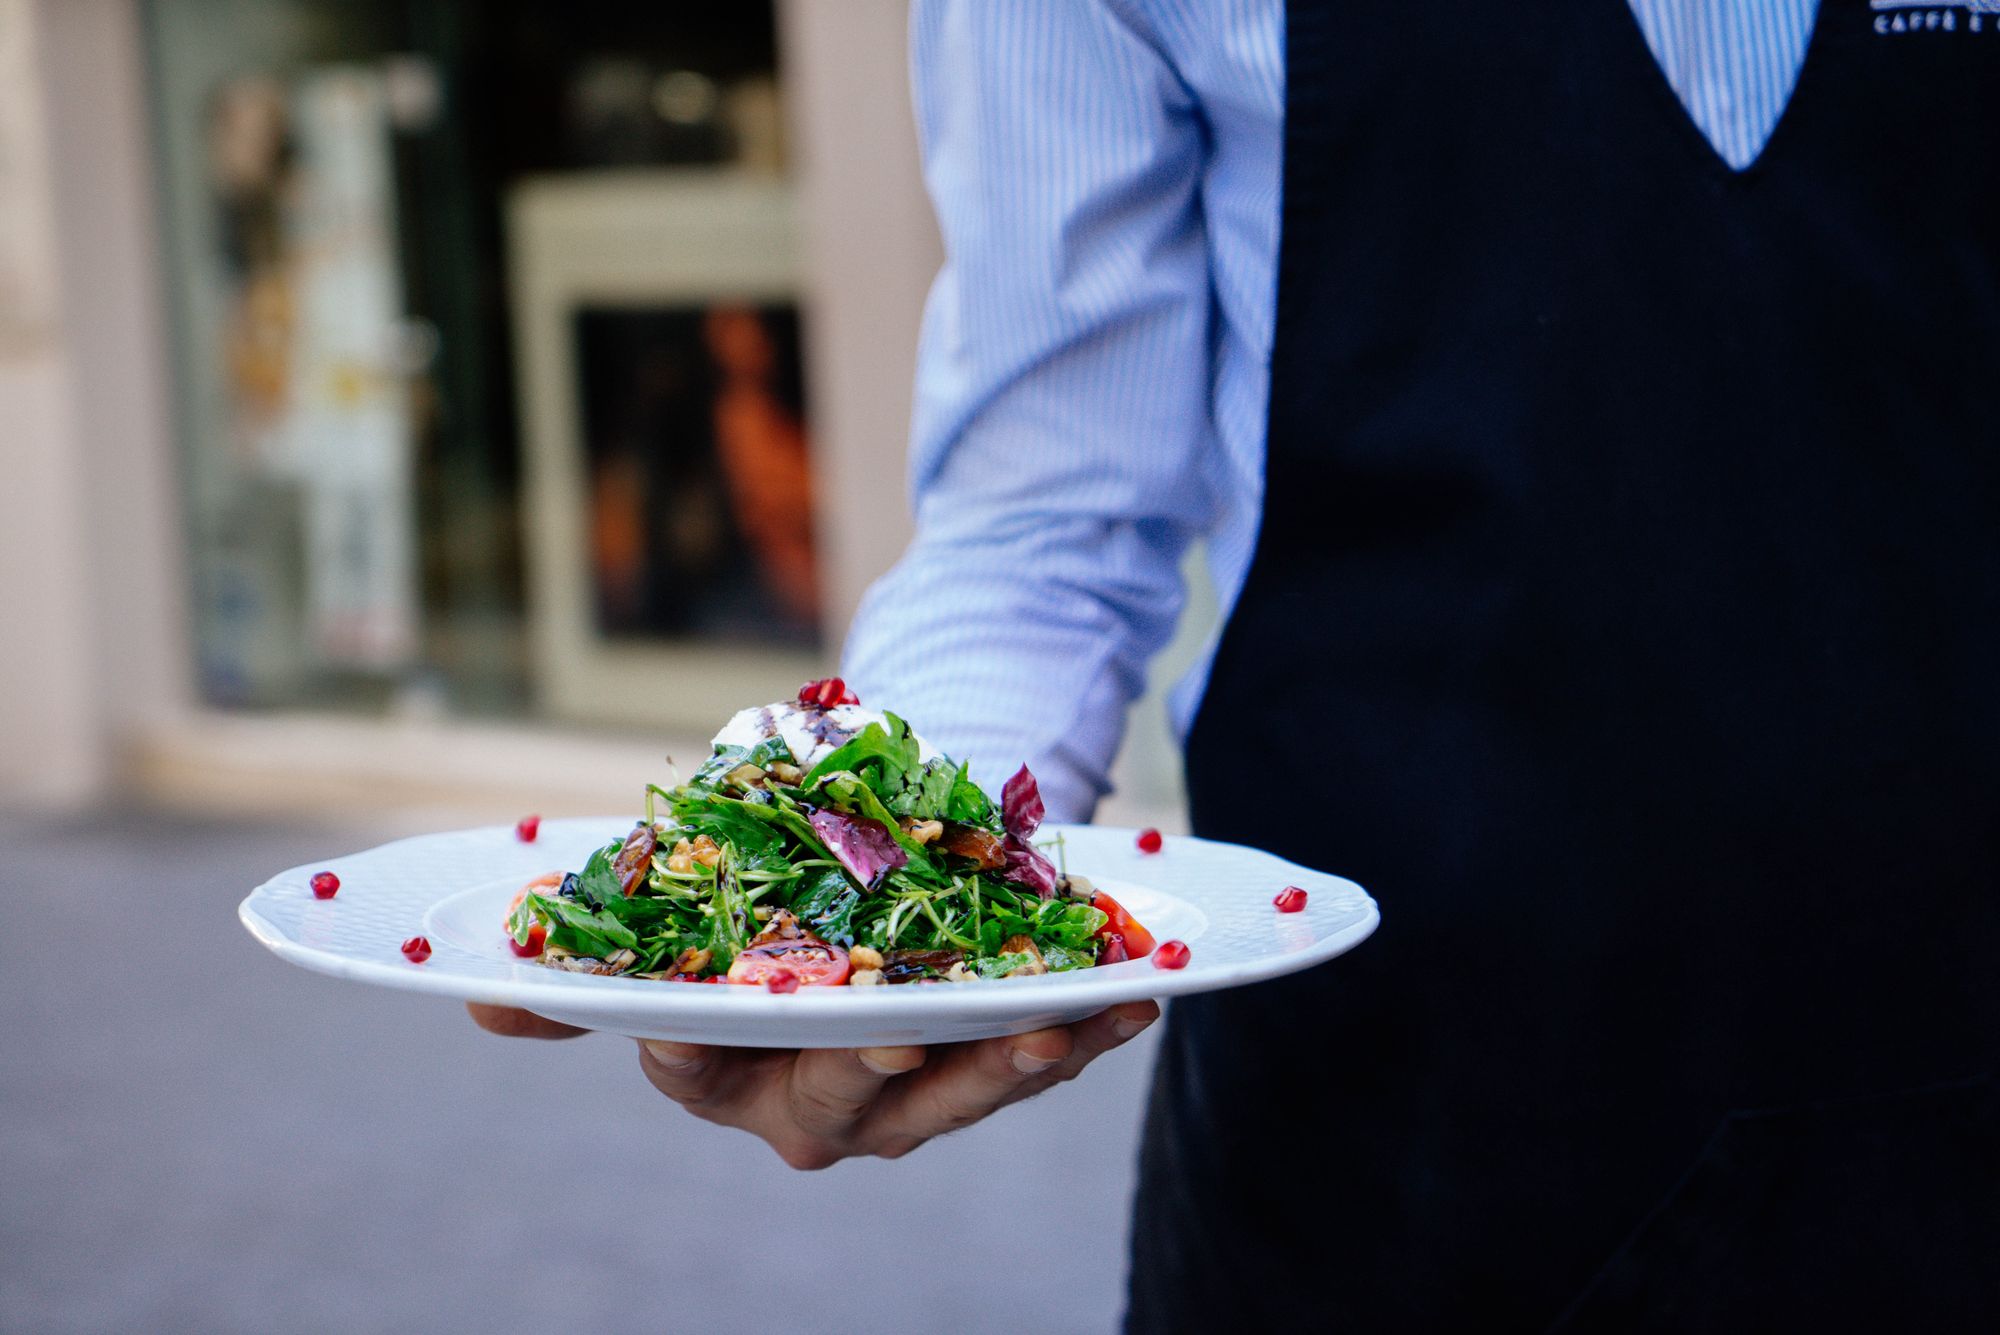 Server holding a beautifully decorated plate with salad.